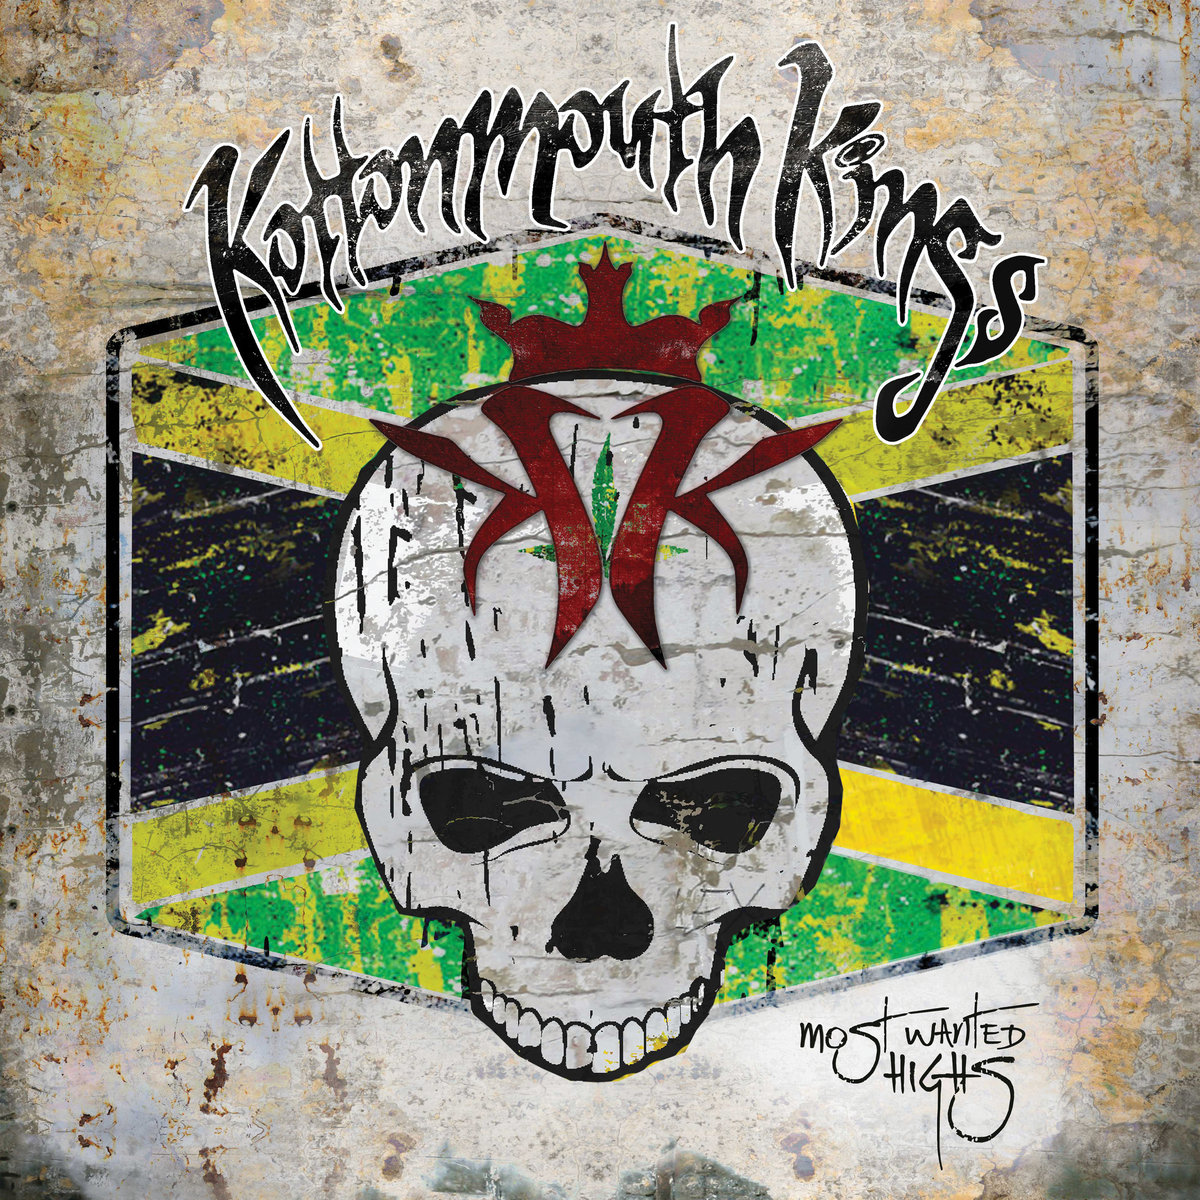 Kottonmouth Kings - Most Wanted Highs (2019)